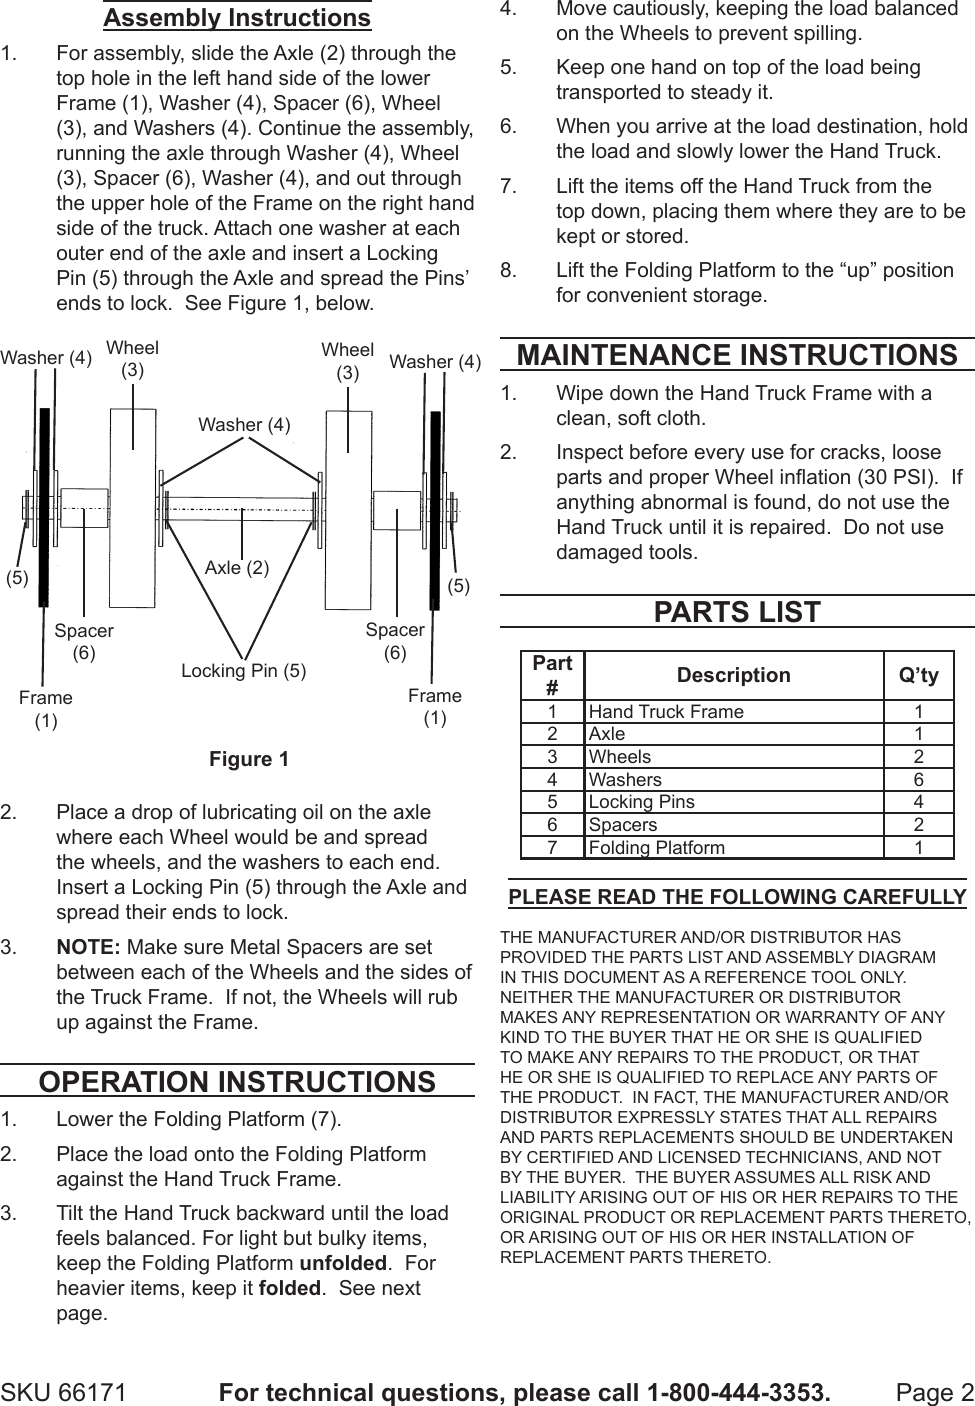 Page 2 of 3 - Harbor-Freight Harbor-Freight-600-Lb-Capacity-Extra-Wide-Hand-Truck-Product-Manual-  Harbor-freight-600-lb-capacity-extra-wide-hand-truck-product-manual